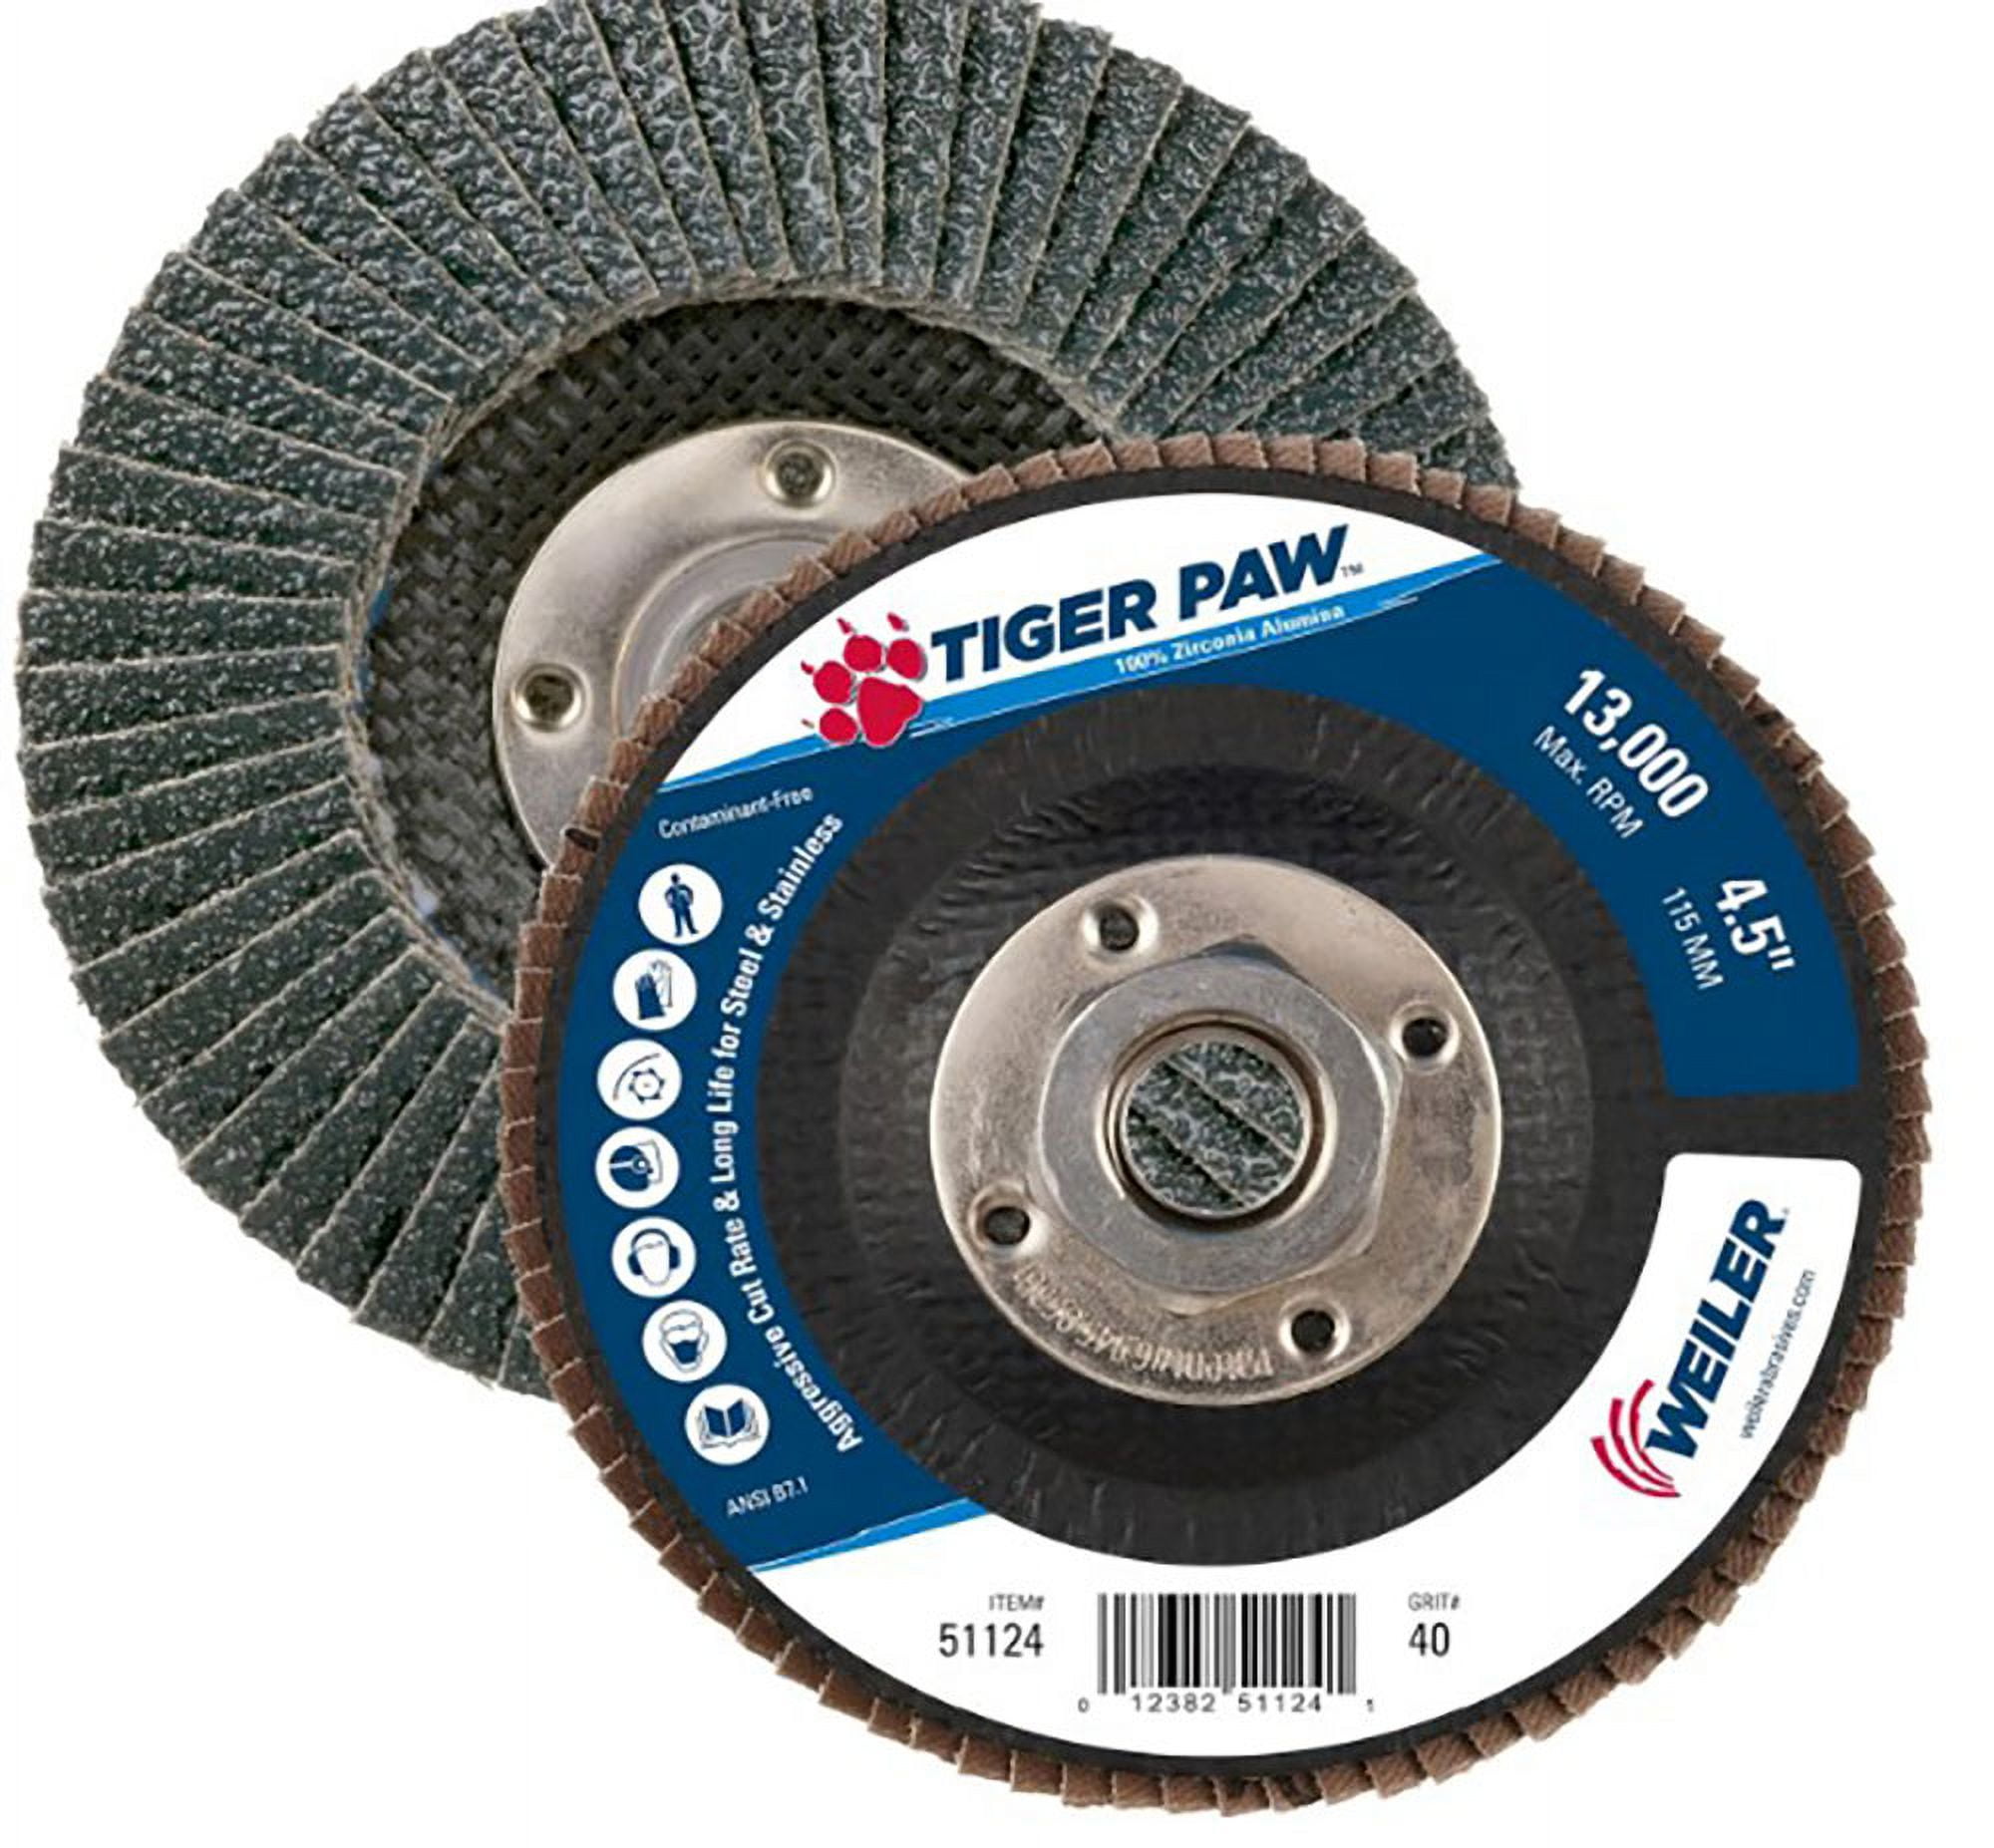 Type 29 Tiger Paw Angled Flap Discs, 4 1/2